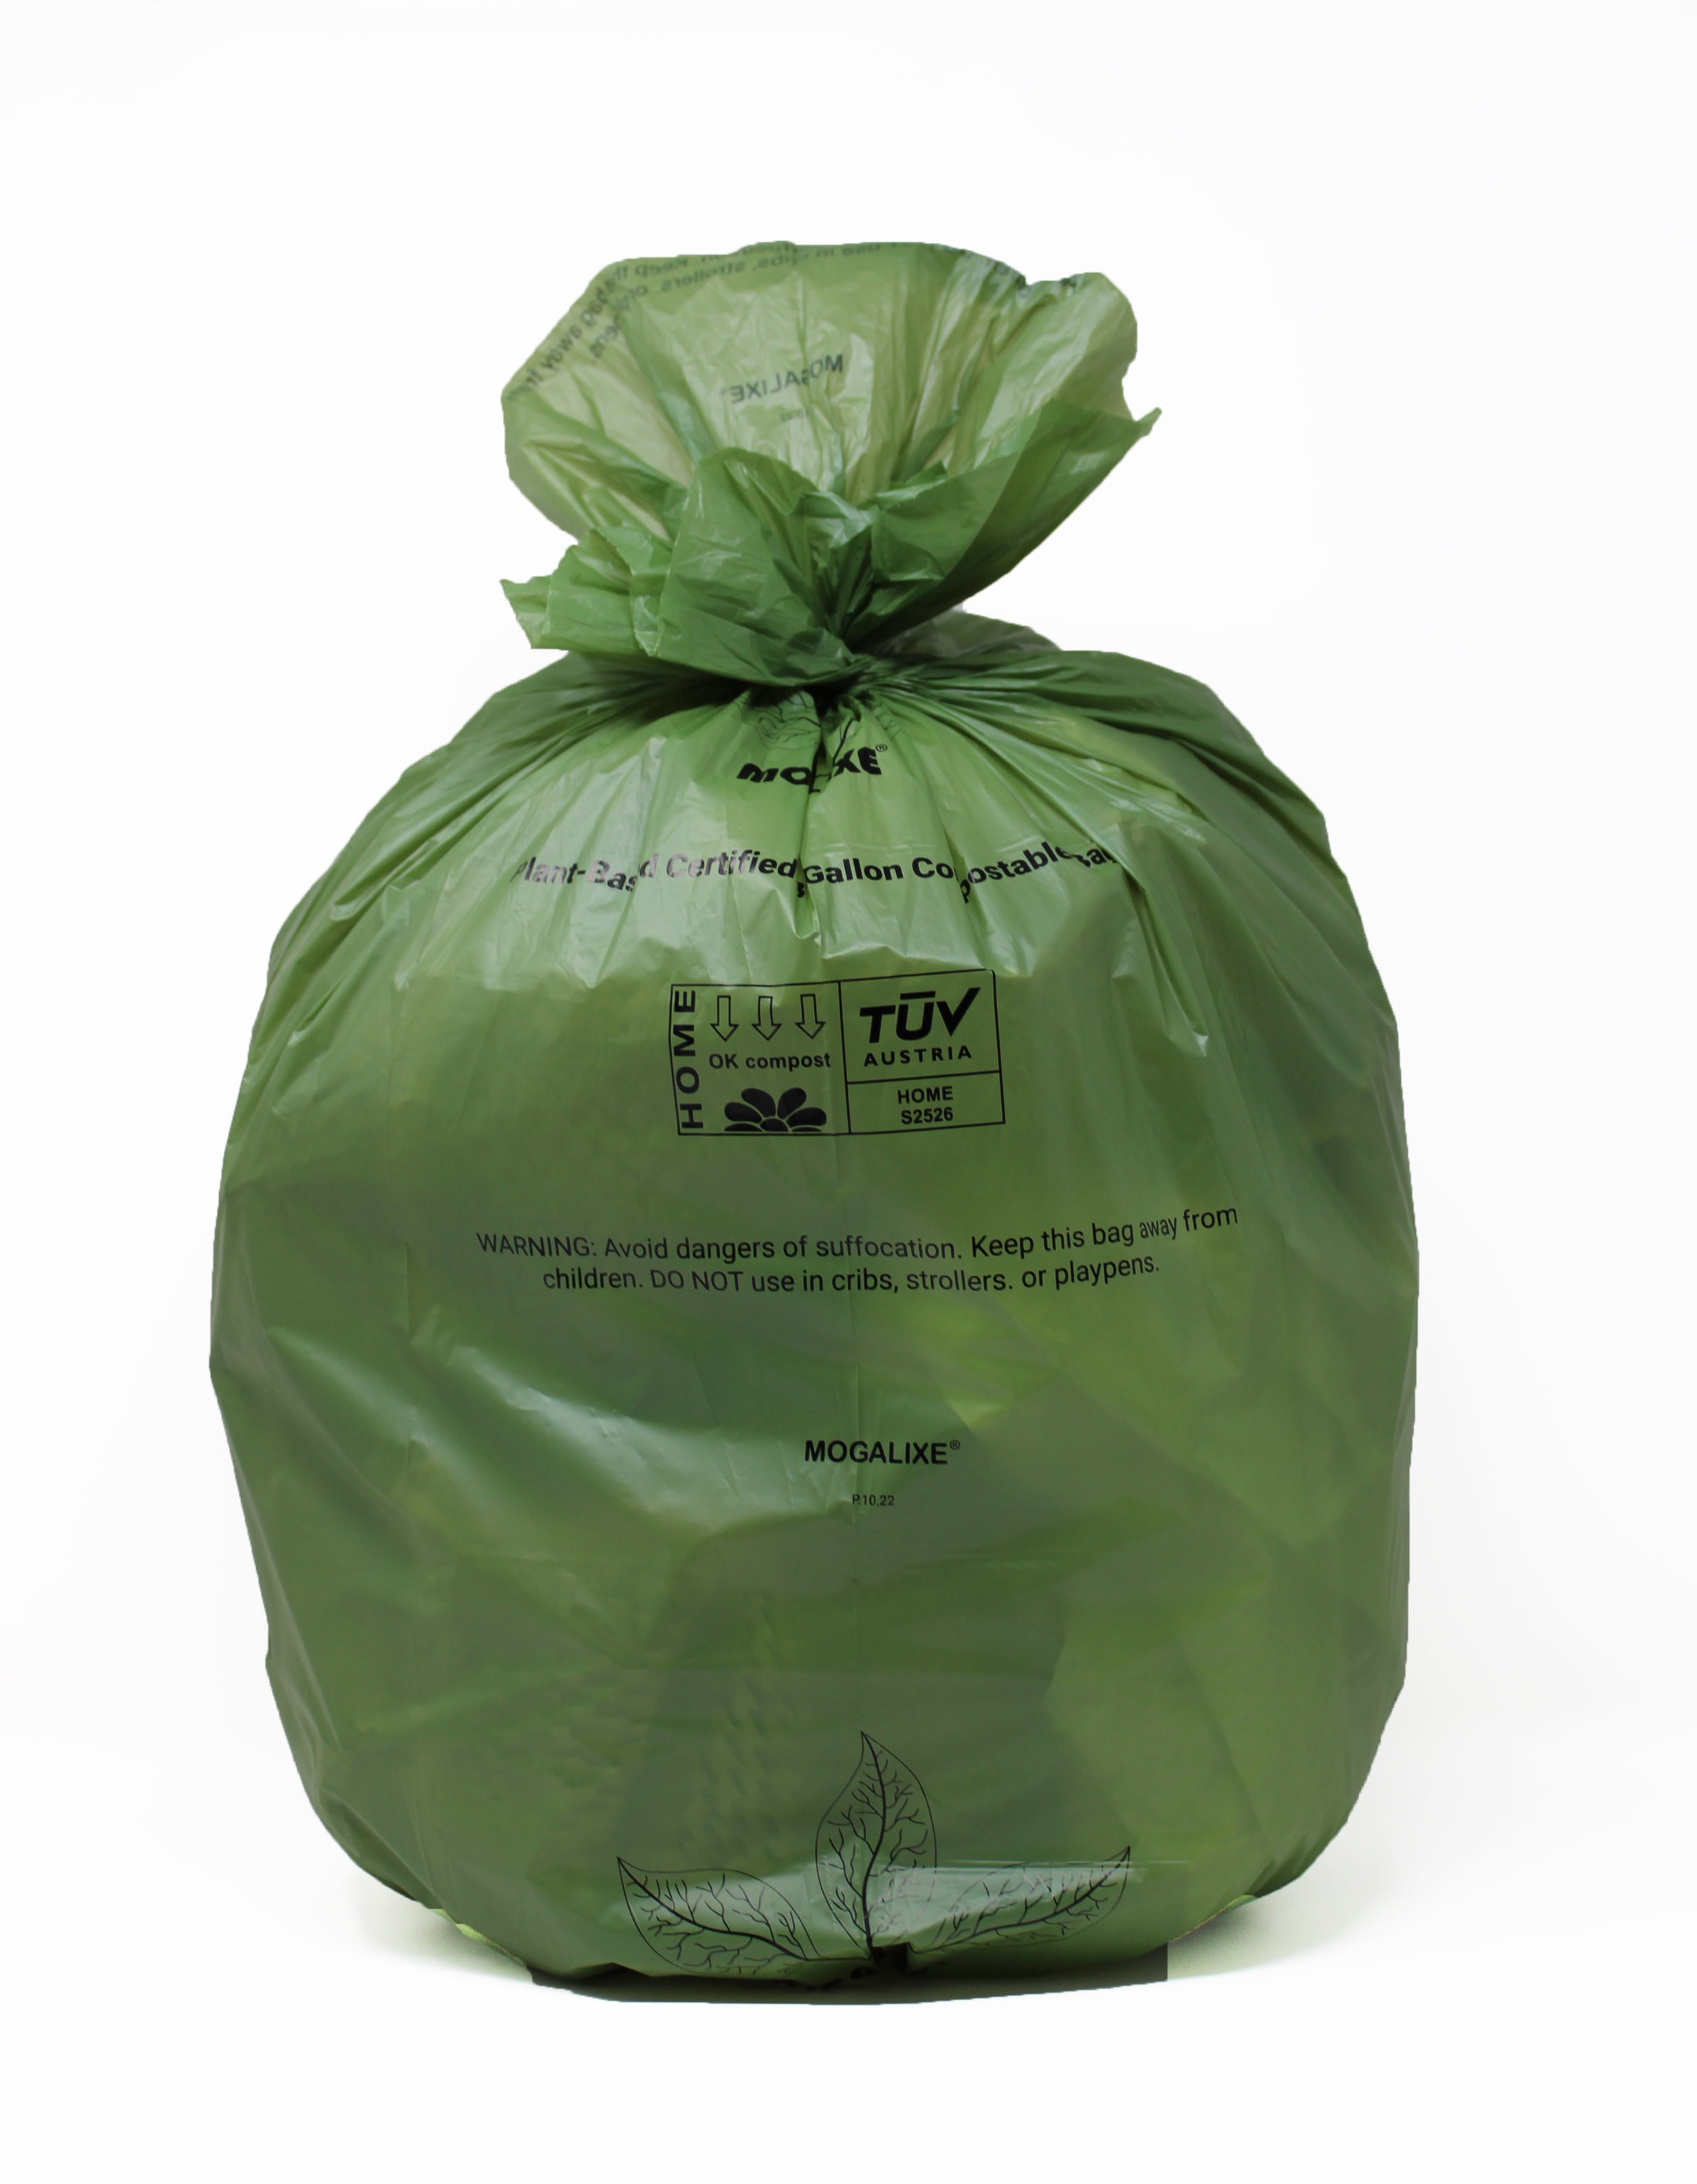 Compostable Trash Bags - Forid Garbage Bags Count Trash Liners Unscented Medium Wastebasket Bags Kitchen Home Office Garbage (5Rolls/Green), Men's